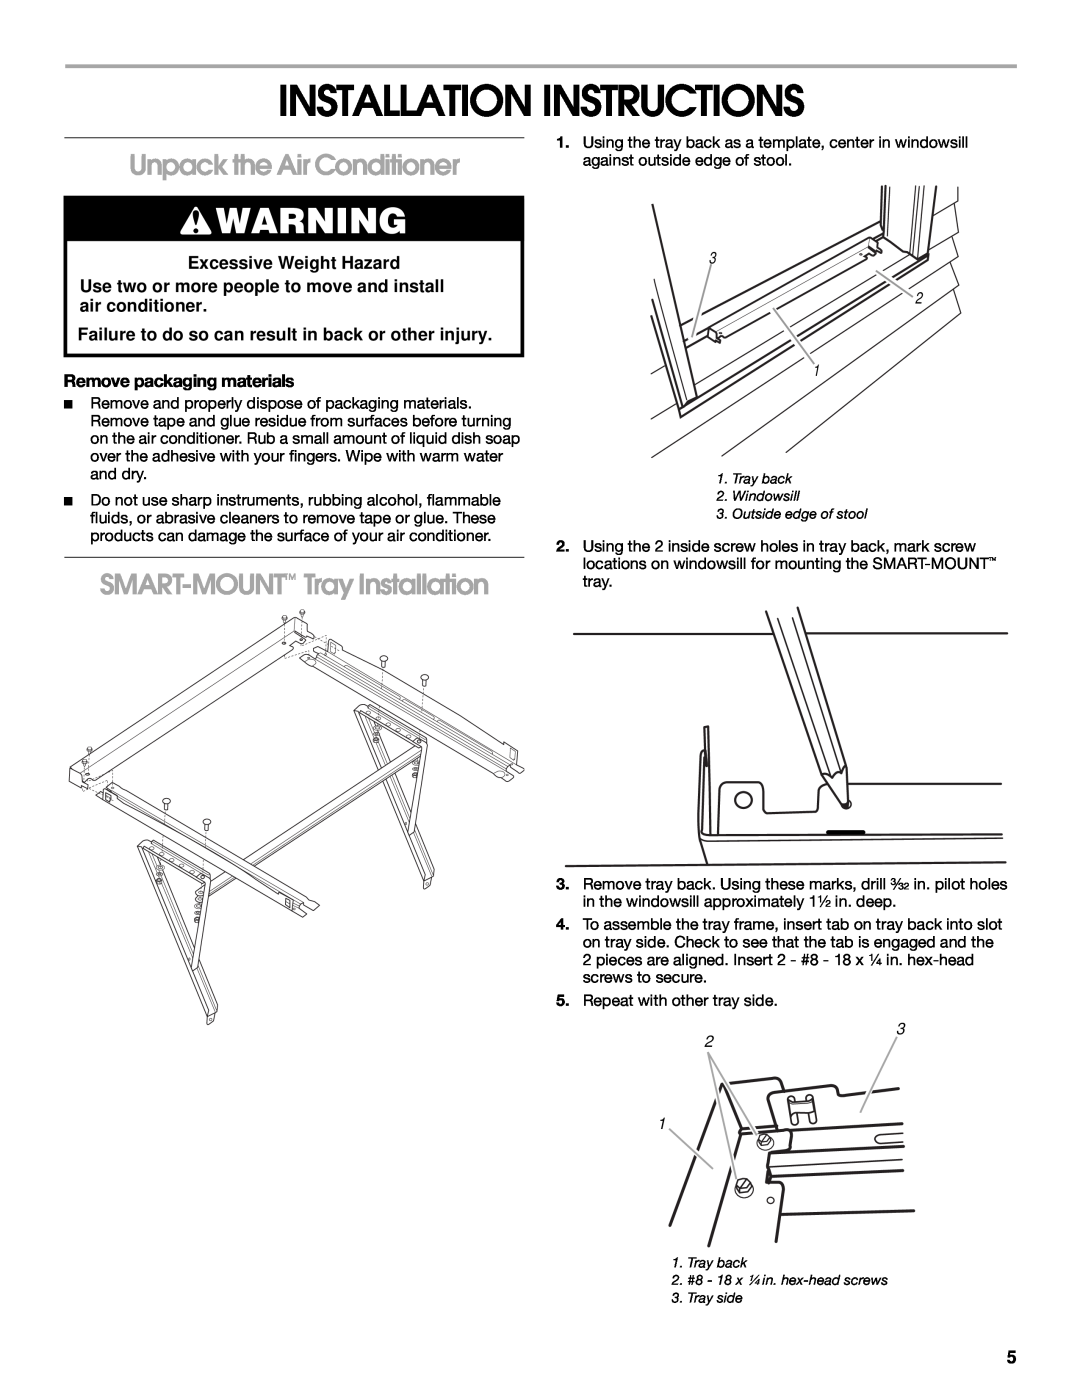 Whirlpool 1187361 manual Installation Instructions, Unpack the Air Conditioner, SMART-MOUNT Tray Installation 